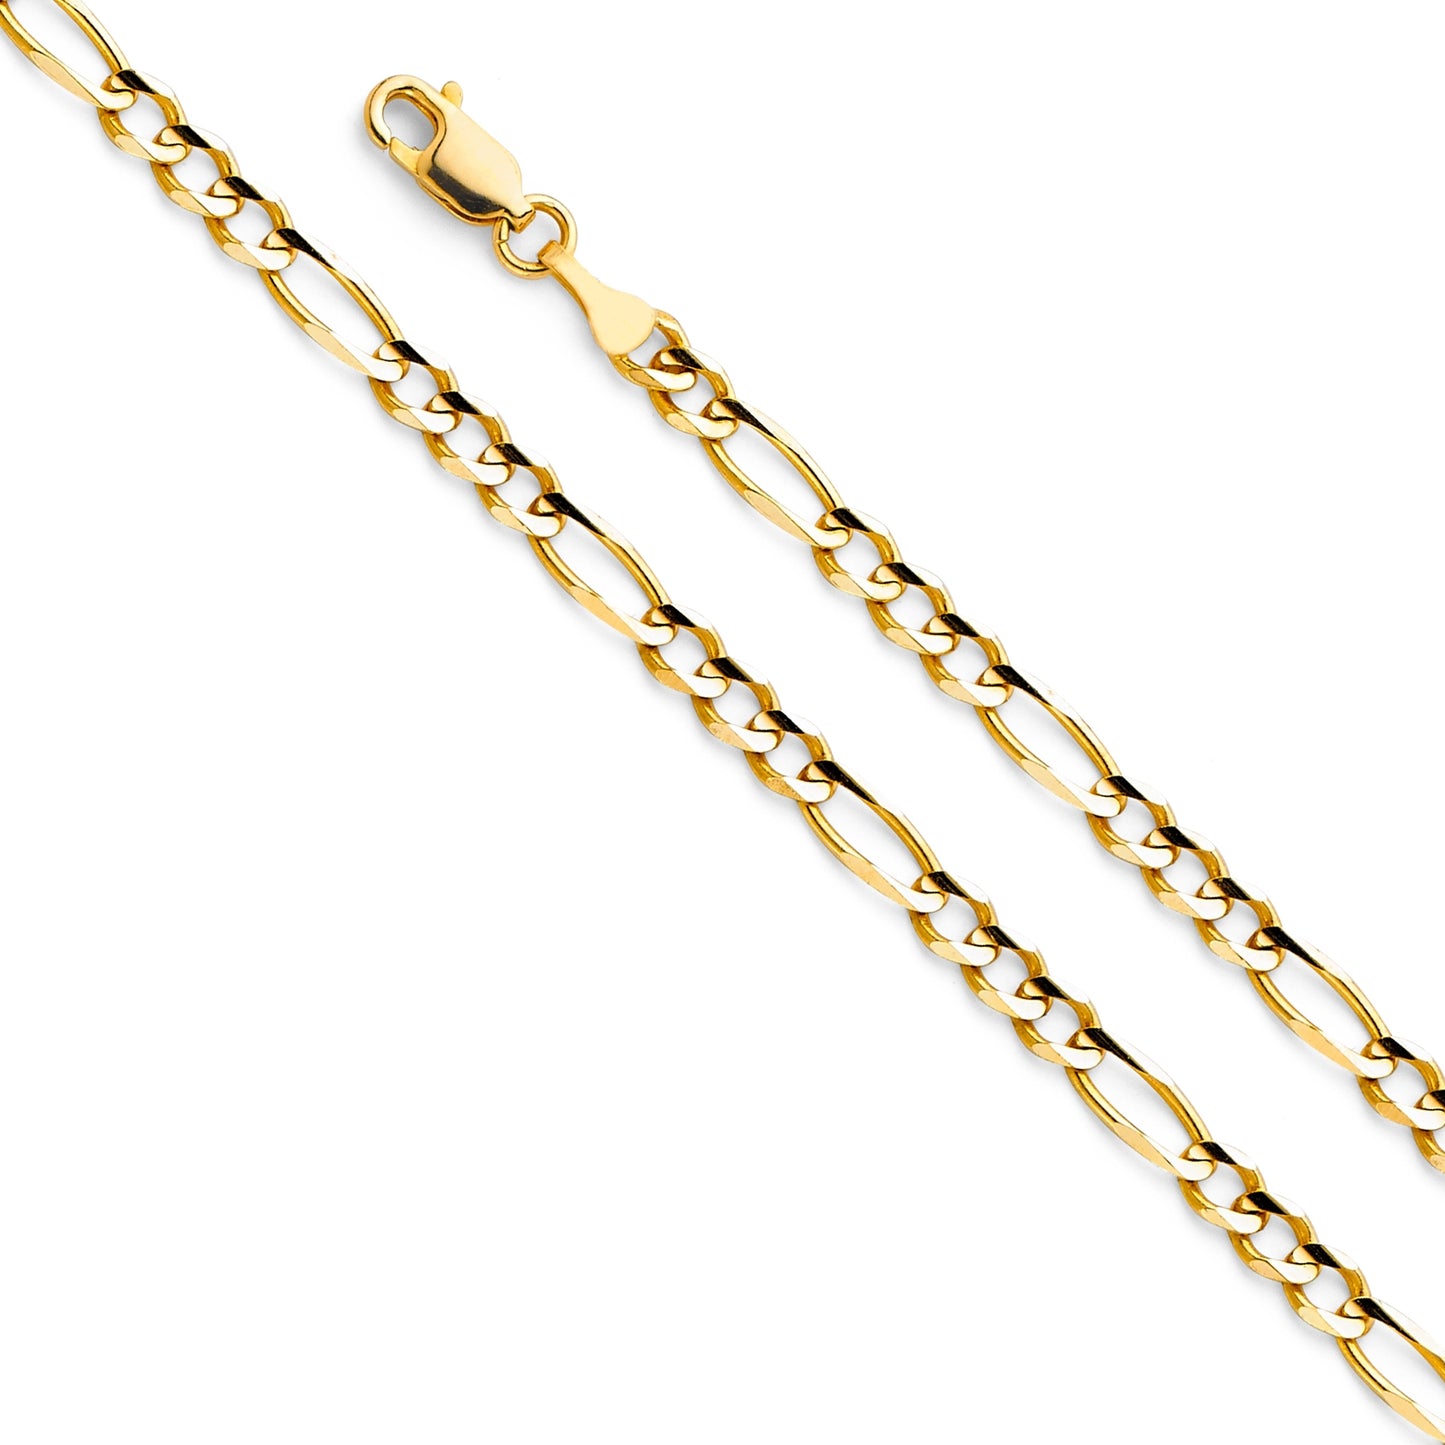 14K Solid Yellow Gold Heavy Figaro Chain 4.4mm thick 24 Inches.  Made in Italy